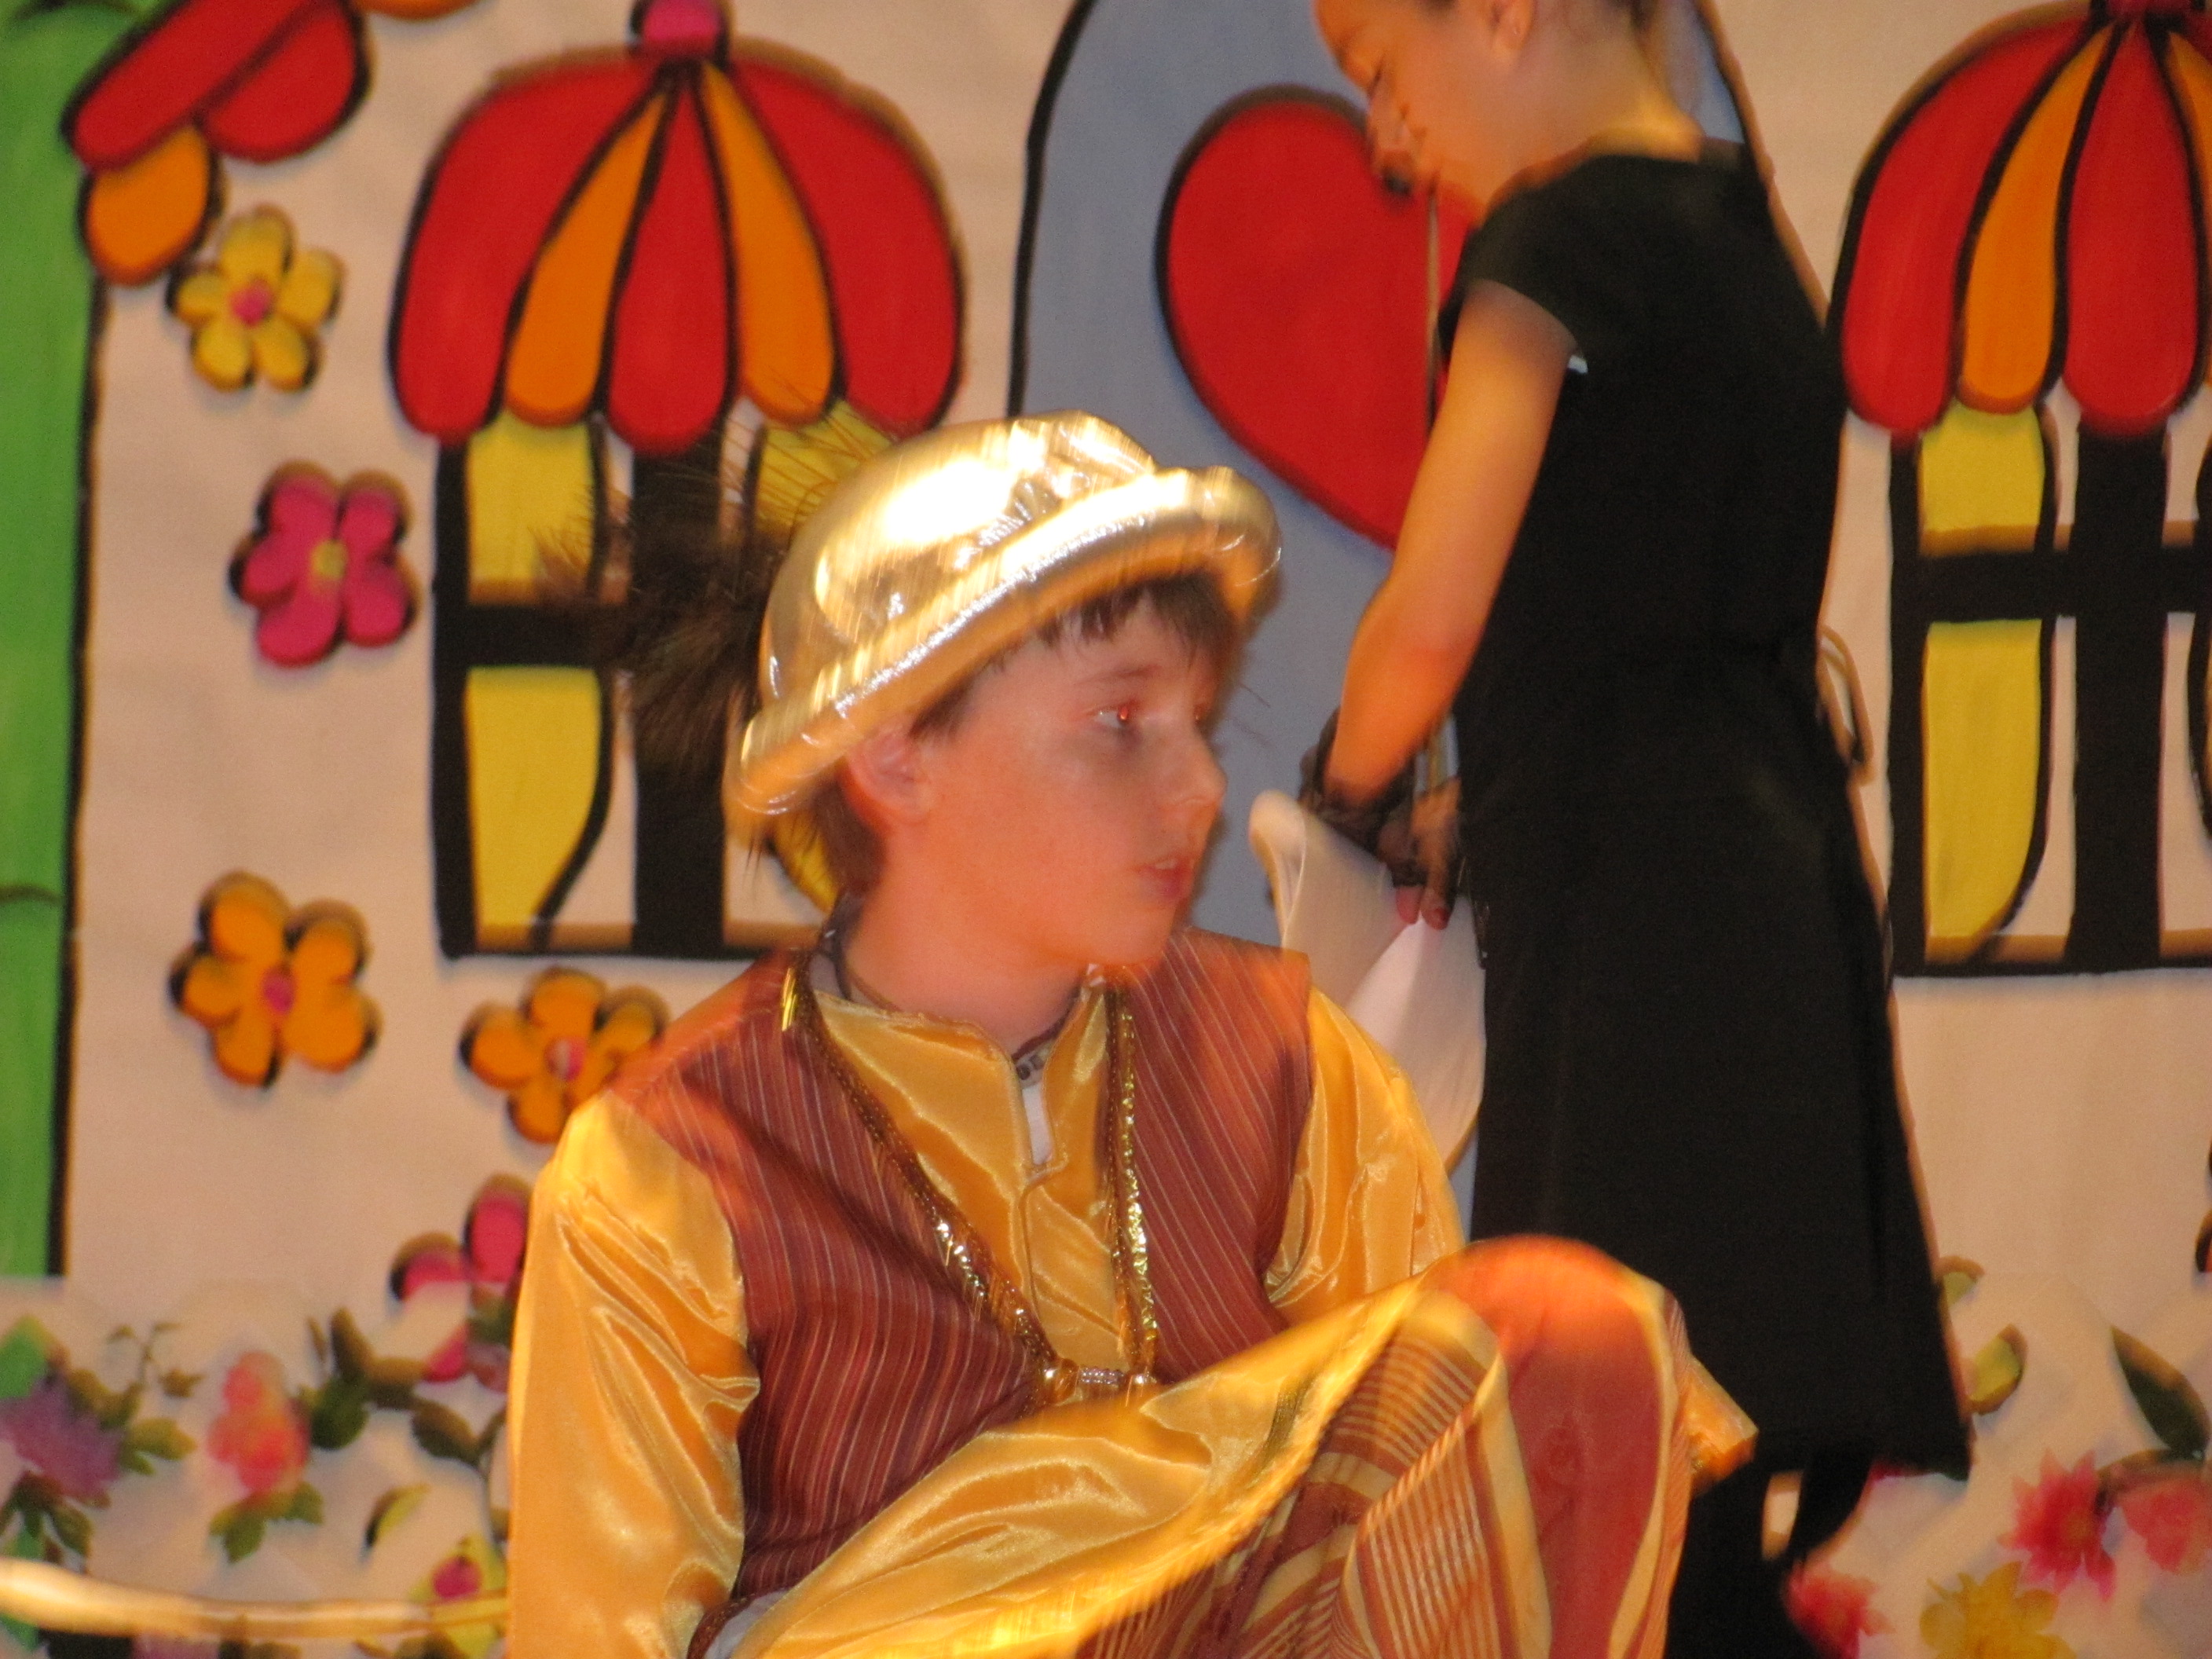 Logan as Jack, in Jack and the Beanstalk, May 2012